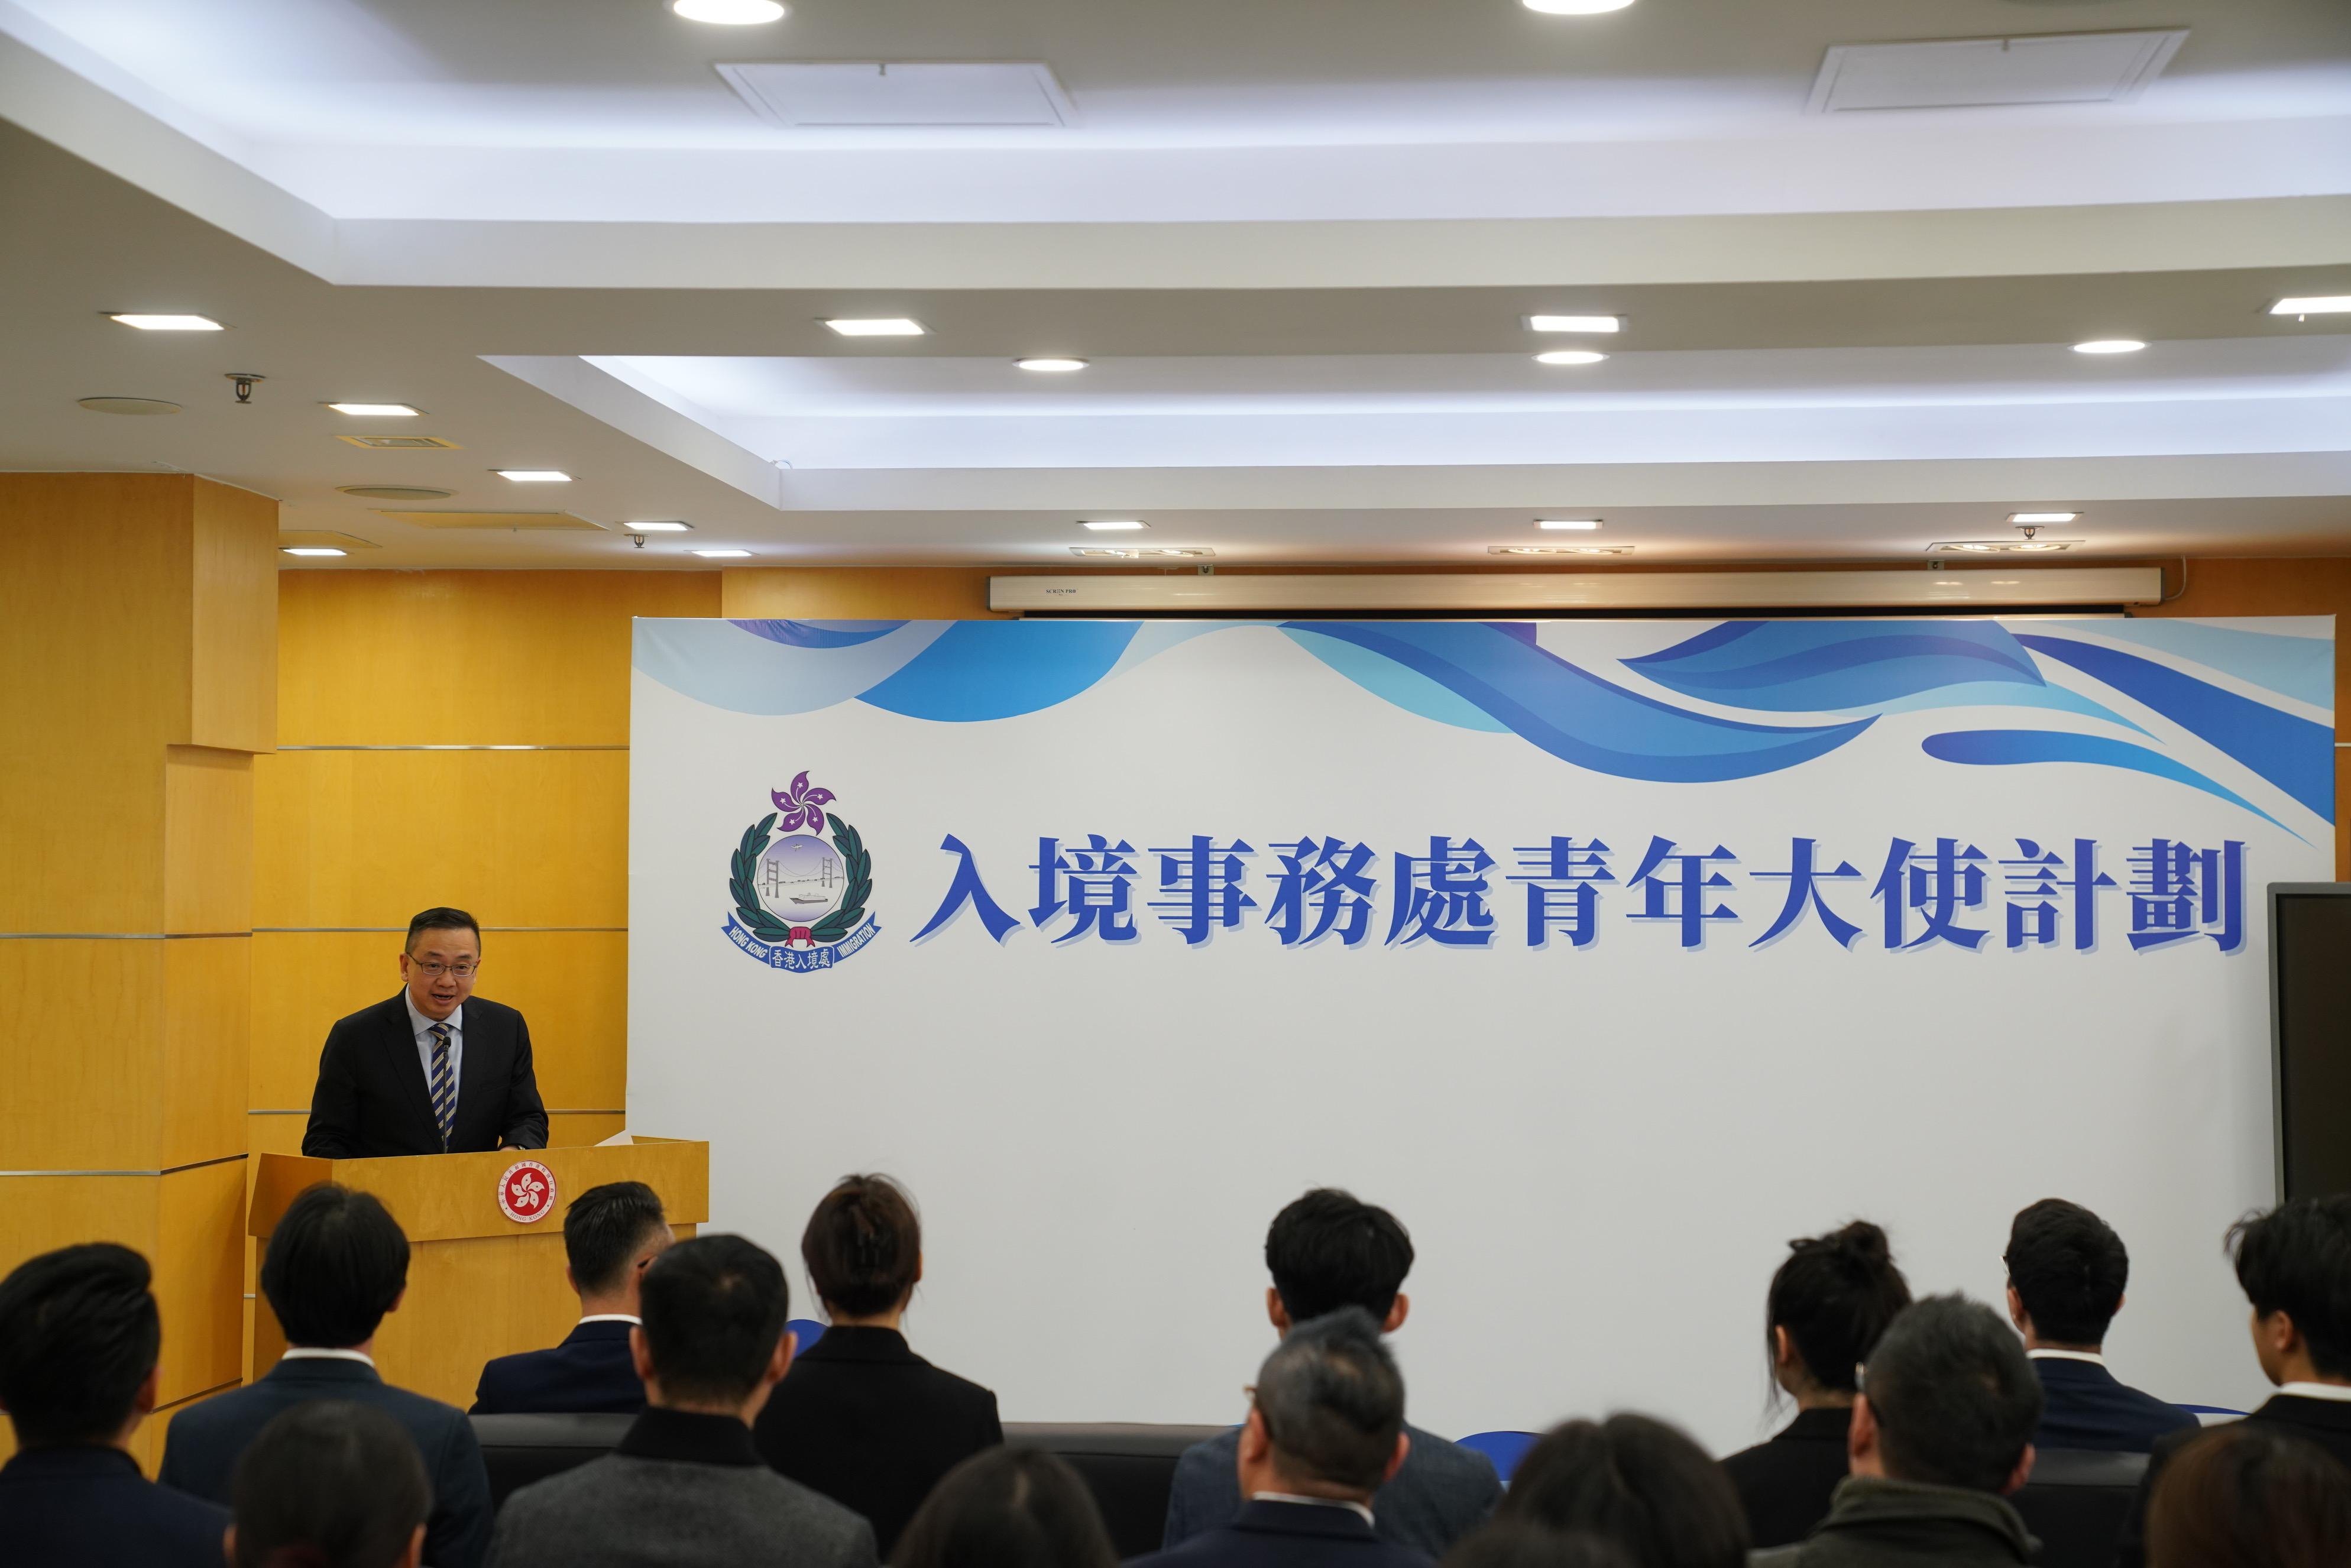 The Director of the Immigration, Mr Benson Kwok, attended the appointment ceremony of the Immigration Department Youth Ambassador Programme in Beijing today (November 11) and delivered a speech.